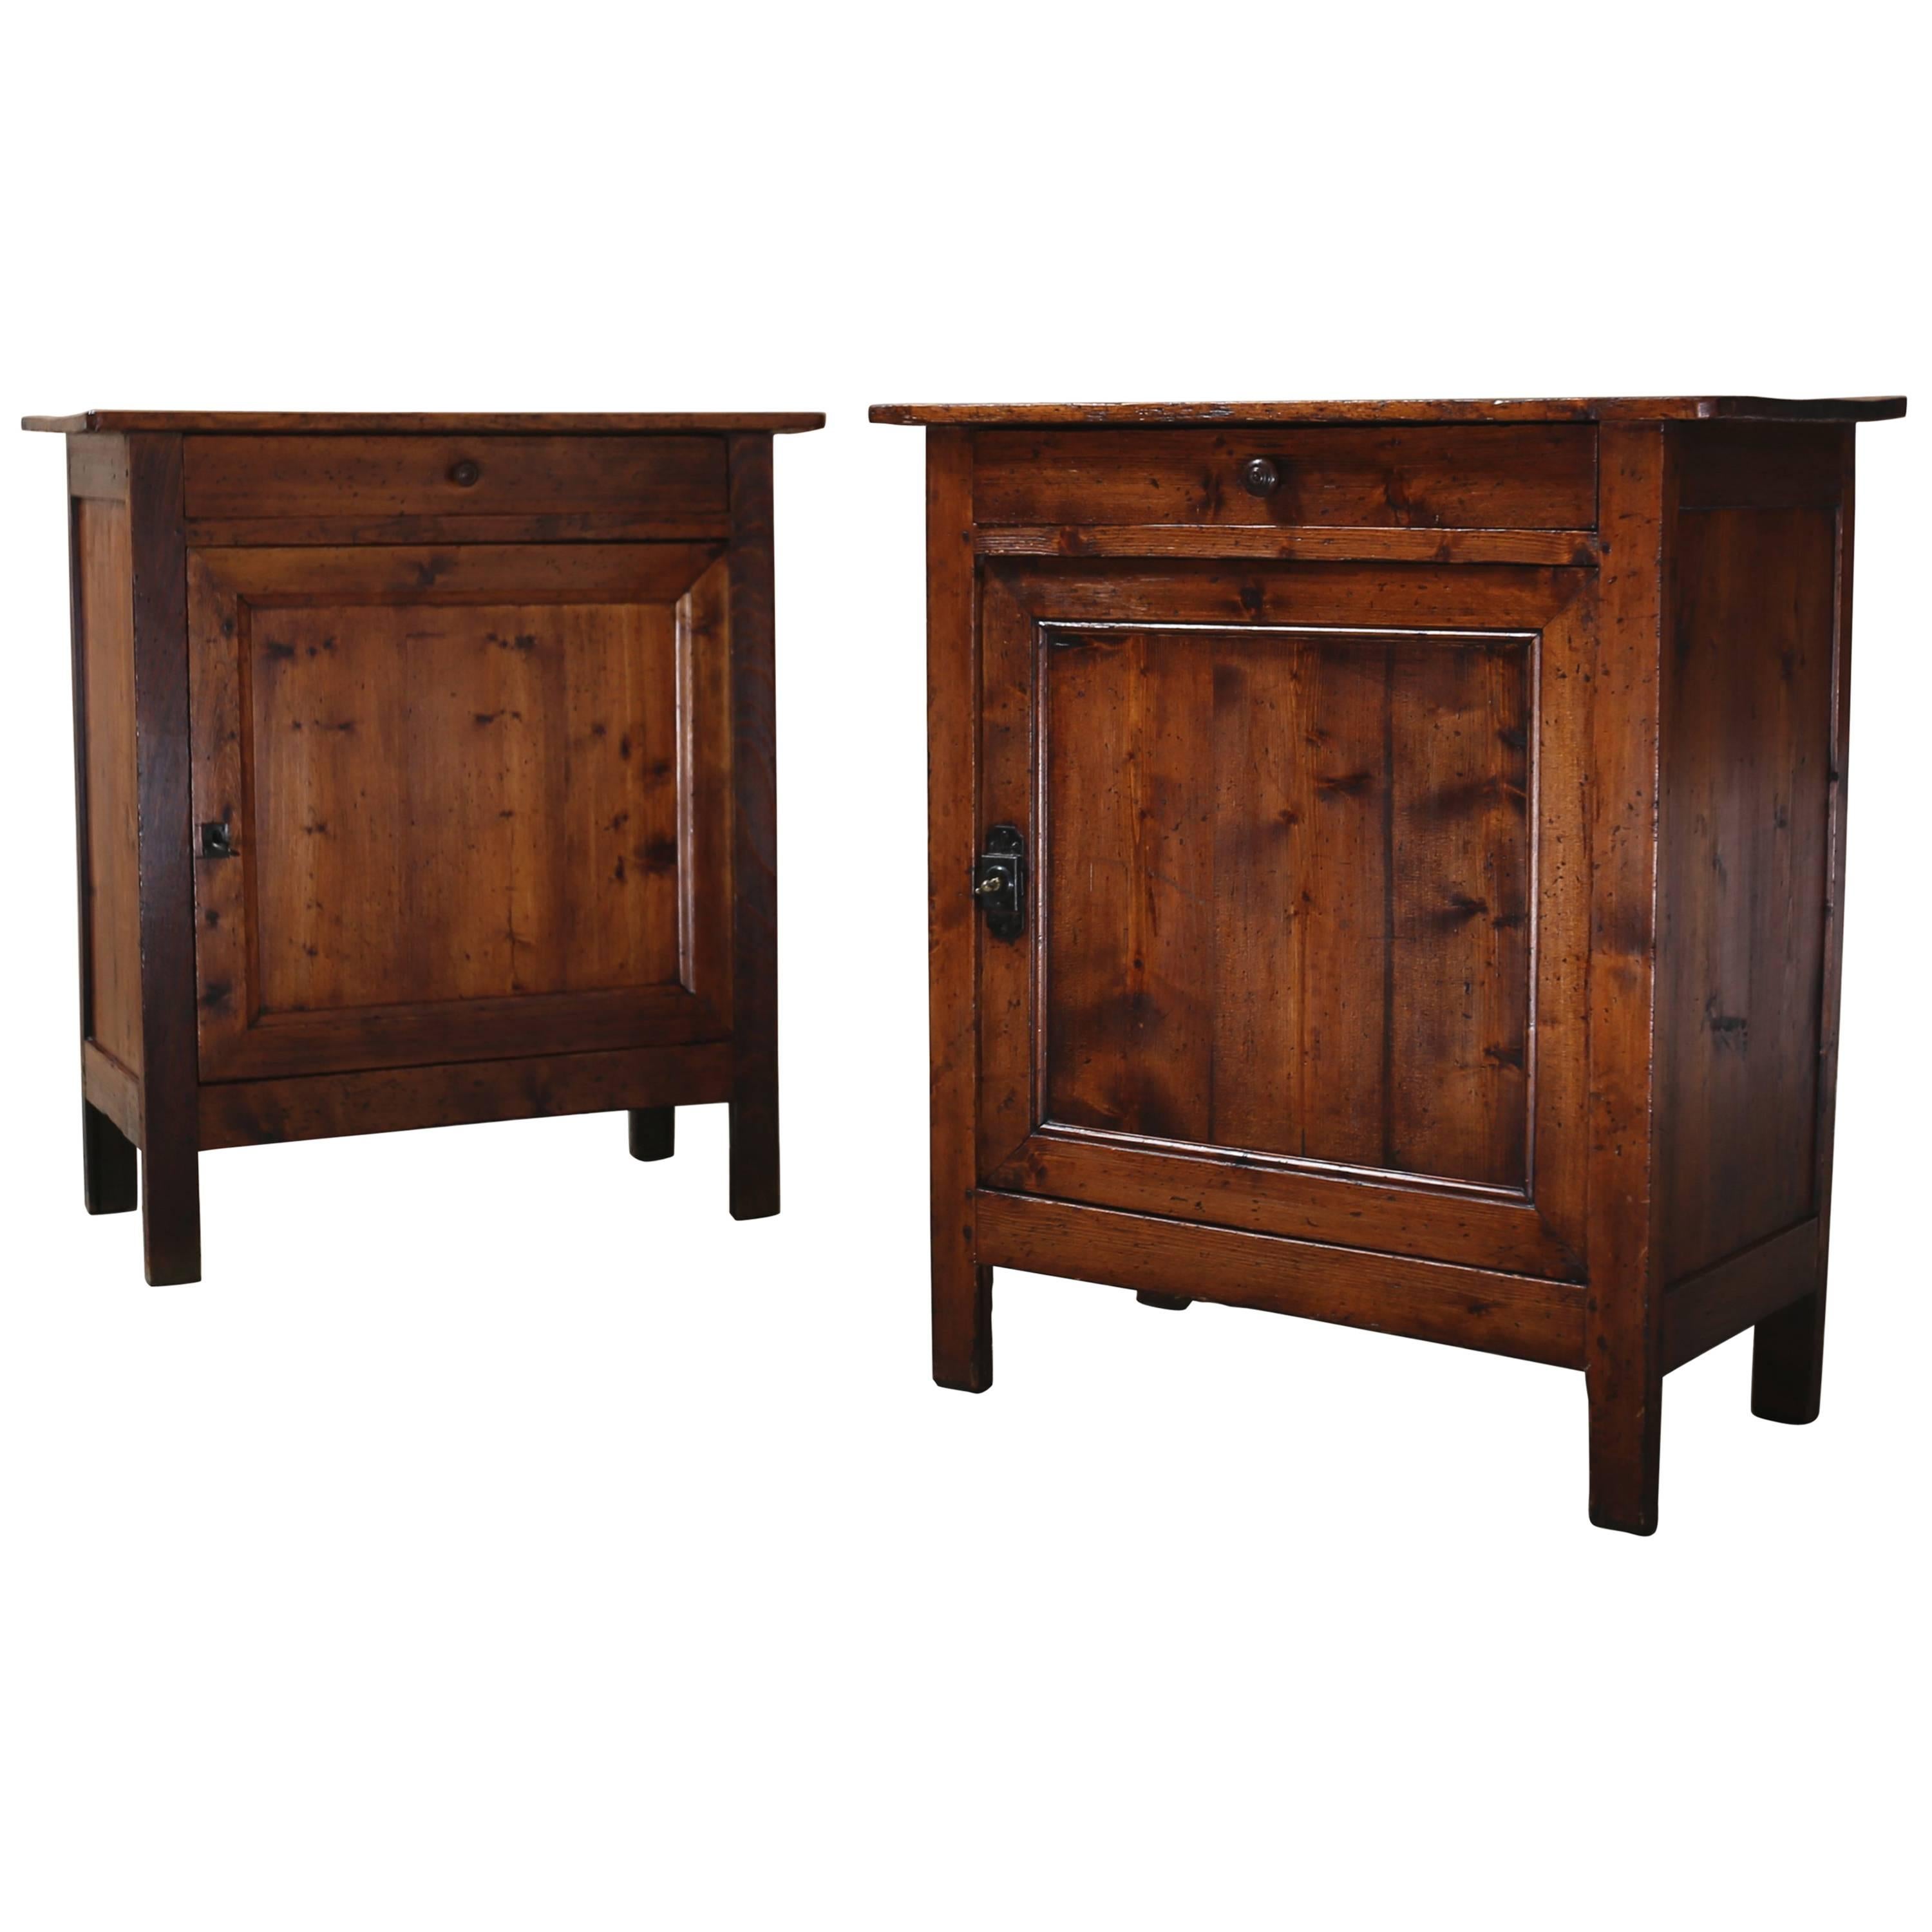 Pair of 19th Century Rustic French Confiture Cabinets